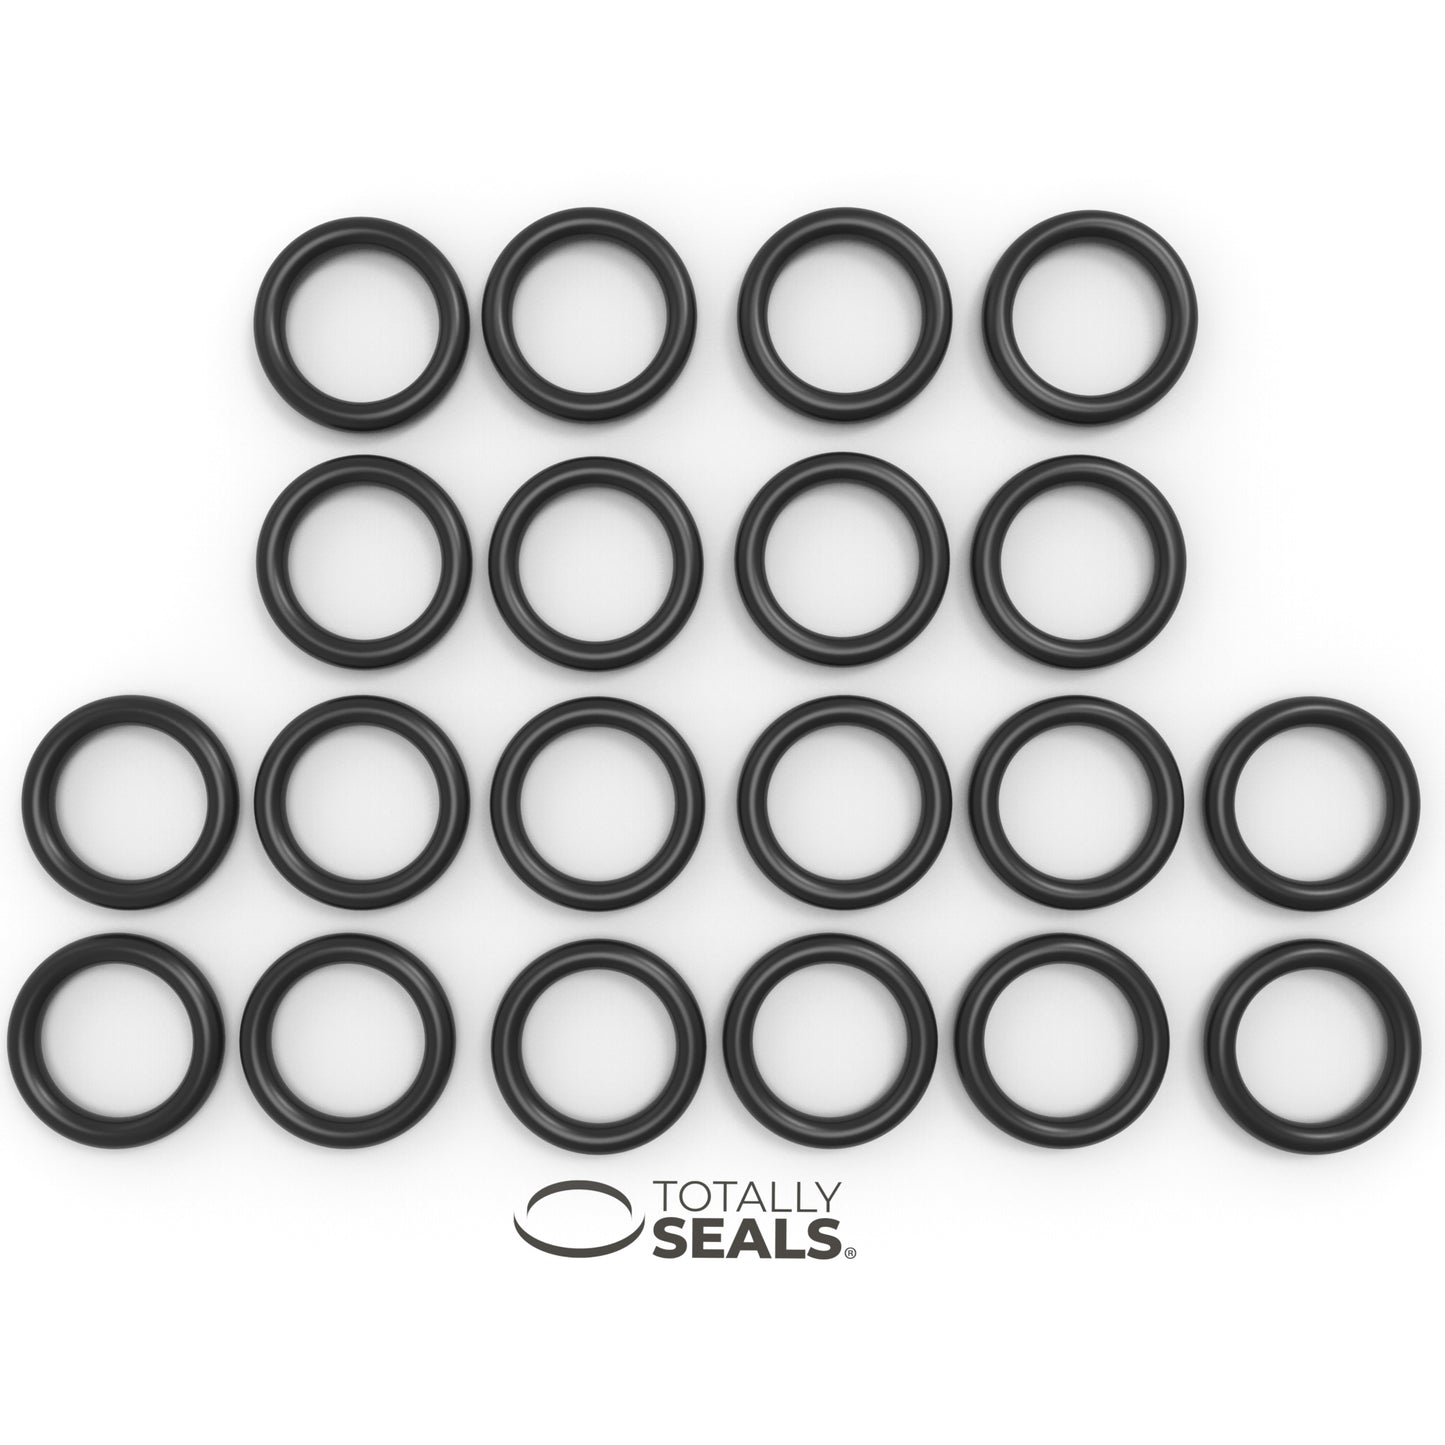 65mm x 5mm (75mm OD) Nitrile O-Rings - Totally Seals®